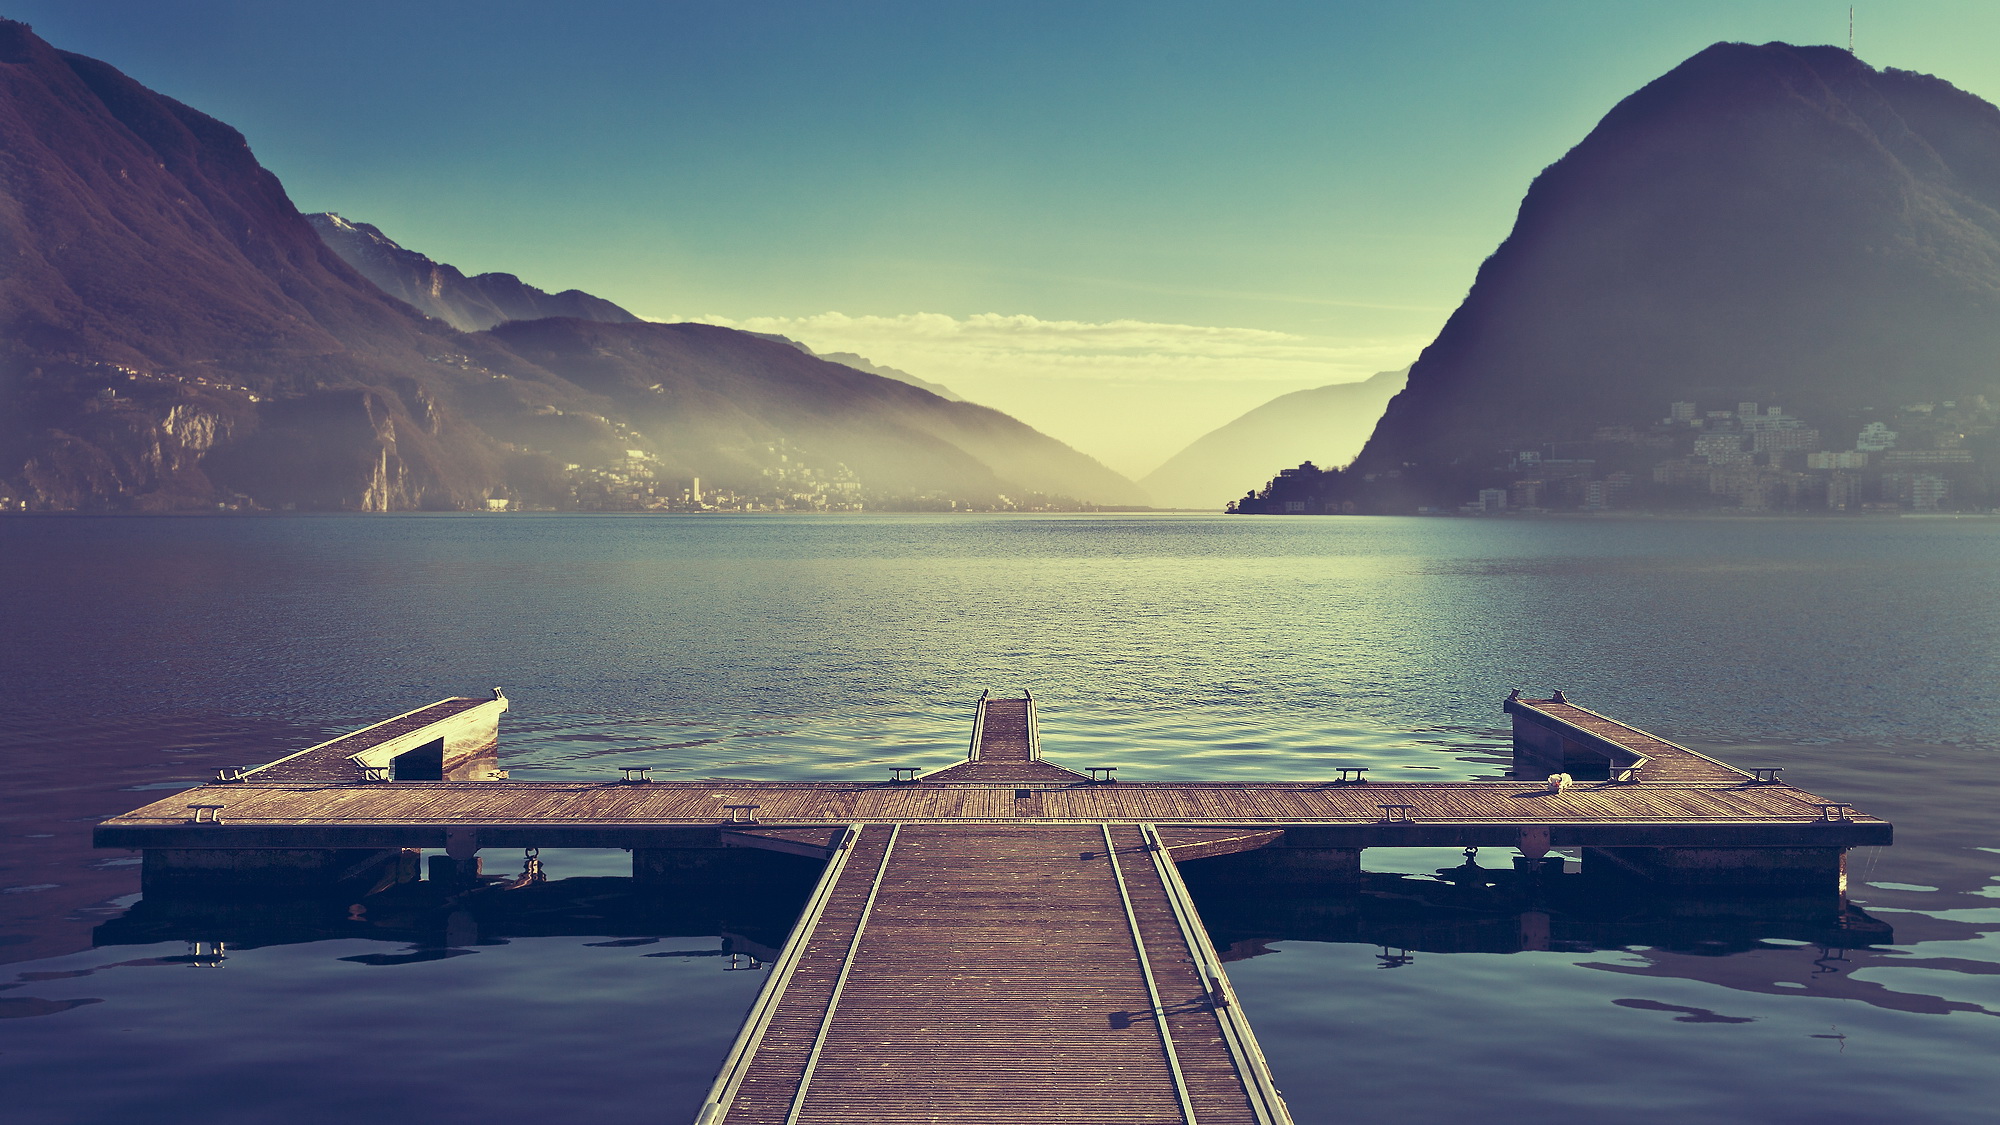 lake-of-lugano-canton-of-ticino-ch-on-the-right-is-san-salvatore-by-marco-g.jpg